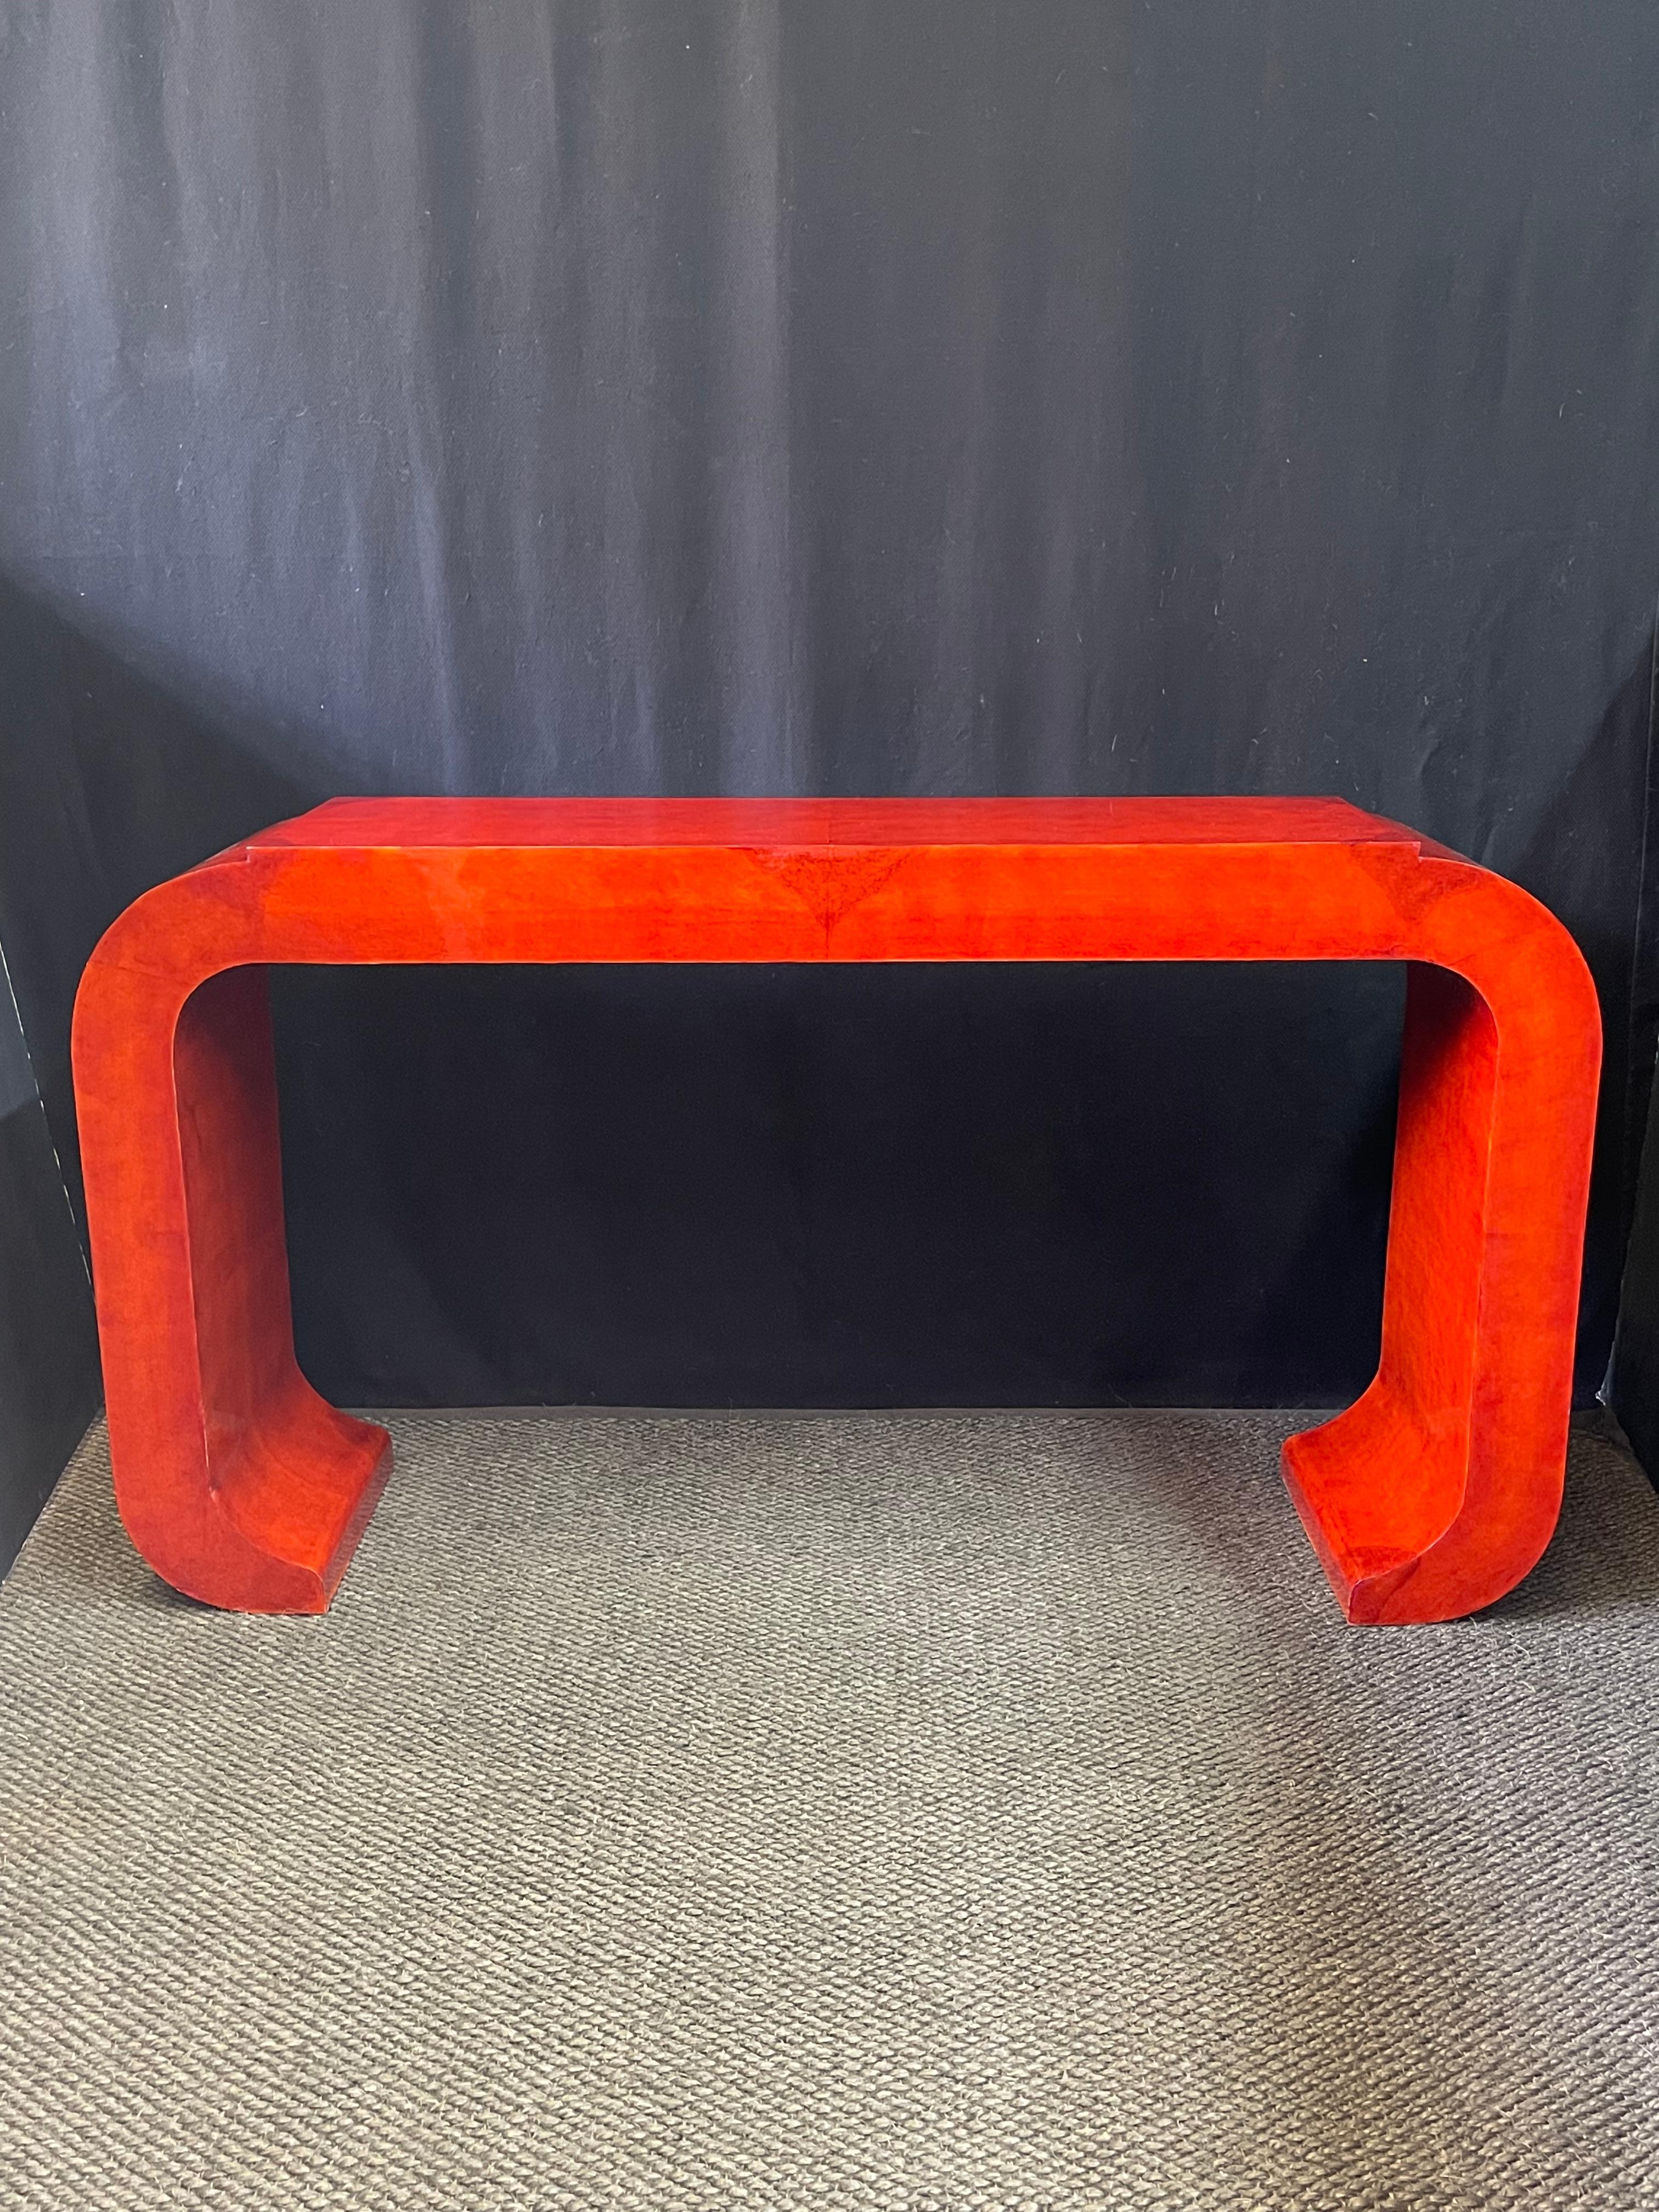 Stunning 21st Century Italian console table created in the manner of Art Deco with curved joints and a raised platform top. The table is finished in a bright and rich red lacquer over a burled wood veneer. It would make an excellent console table as